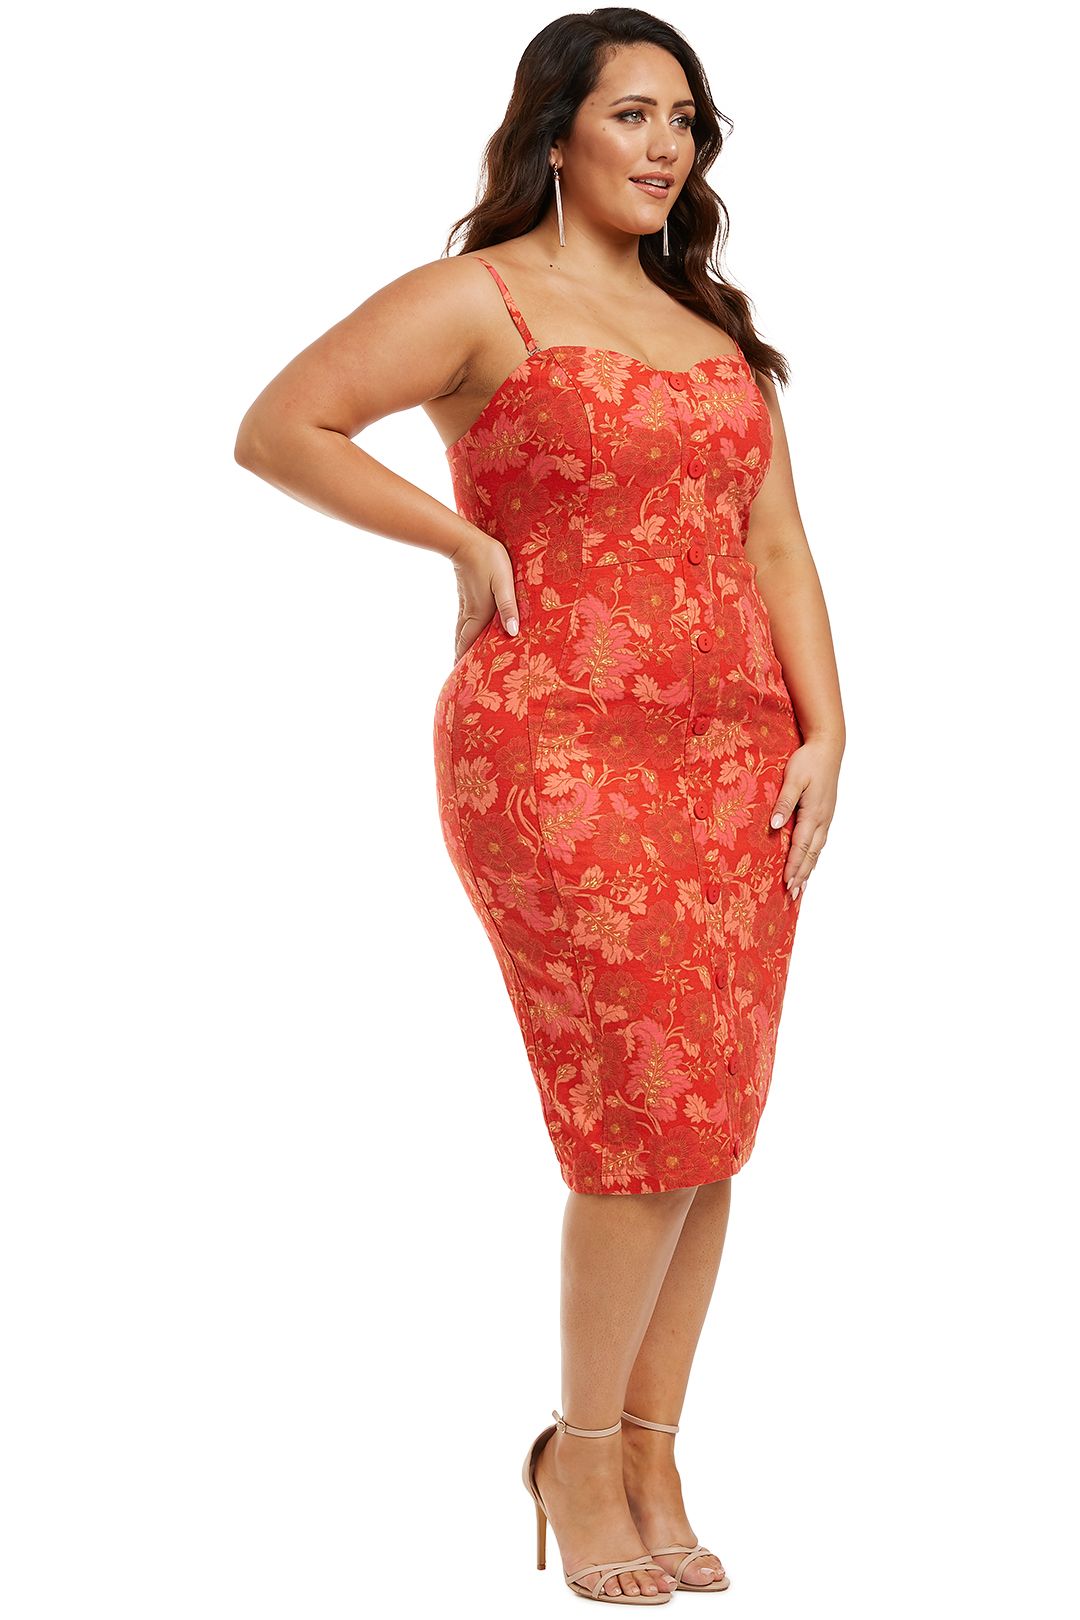 Ministry-of-Style-Hibiscus-Strapless-Dress-Print-Side